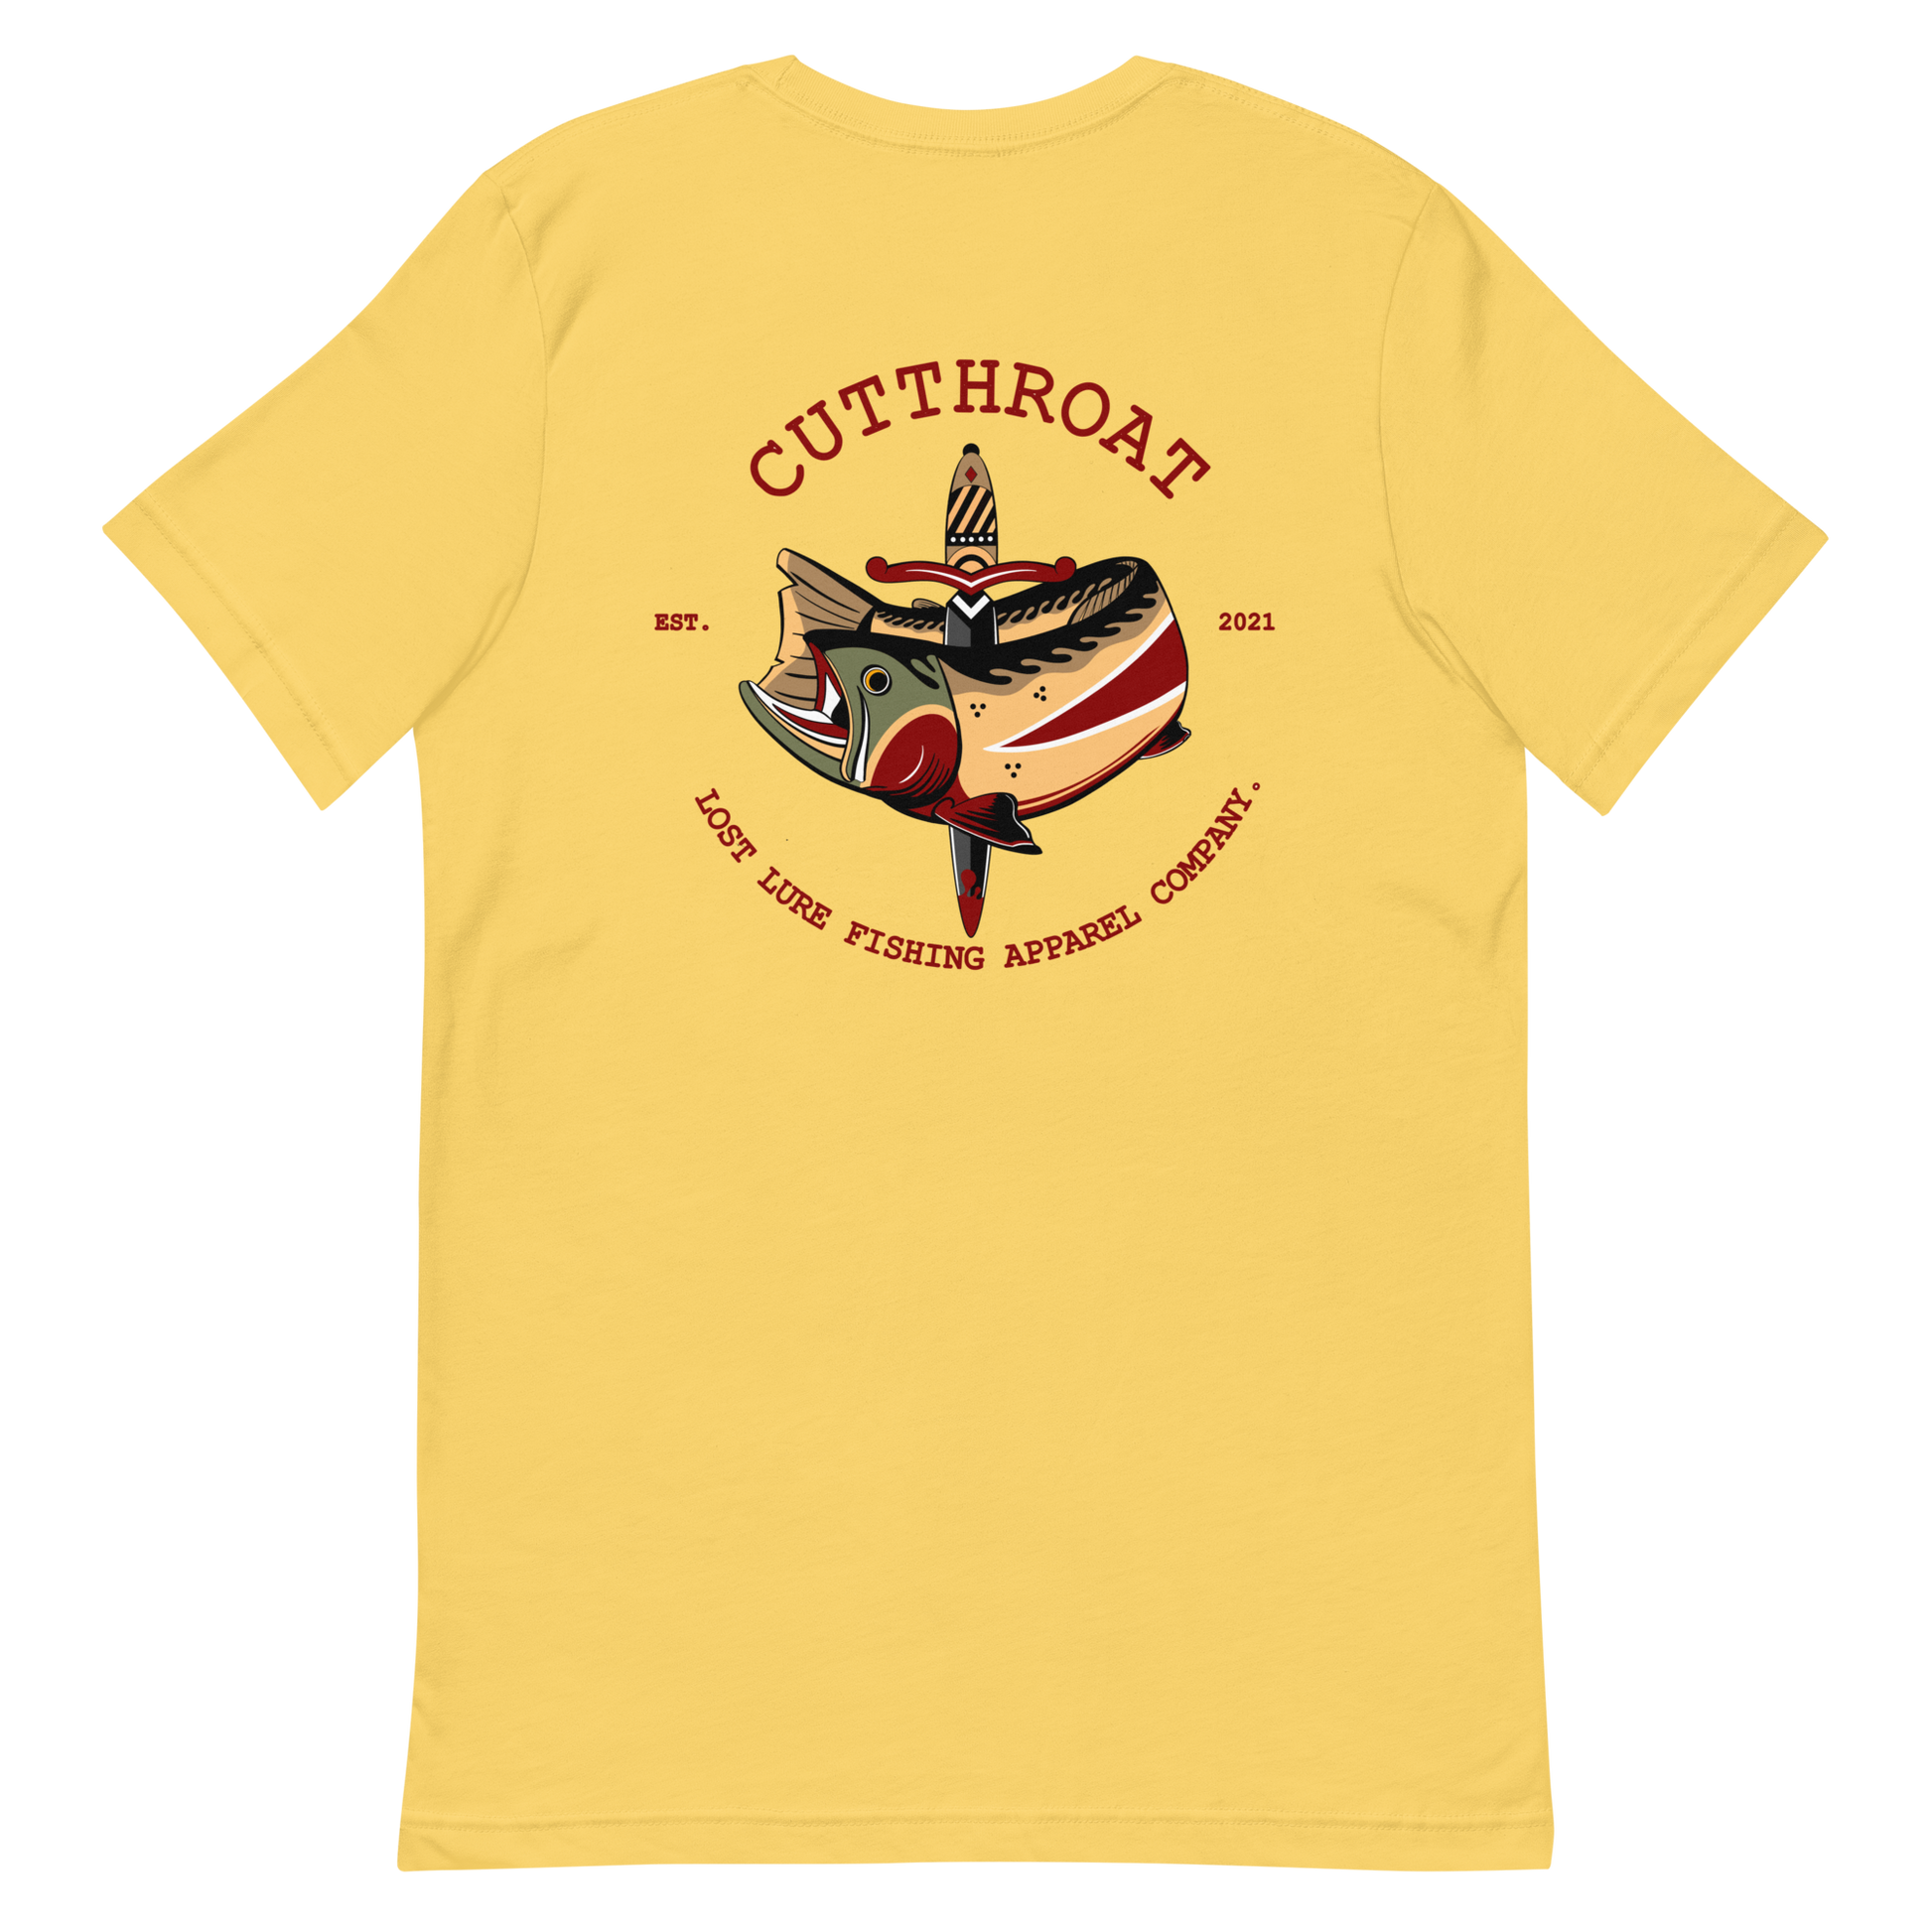 Cutthroat Trout fishing shirt. It’s an American traditional style design with a cutthroat trout and a dagger. The shirt reads Cutthroat trout, est. 2021, lost lure fishing apparel company. The front of the shirt has the lost lure logo. Yellow fishing shirt, Back side